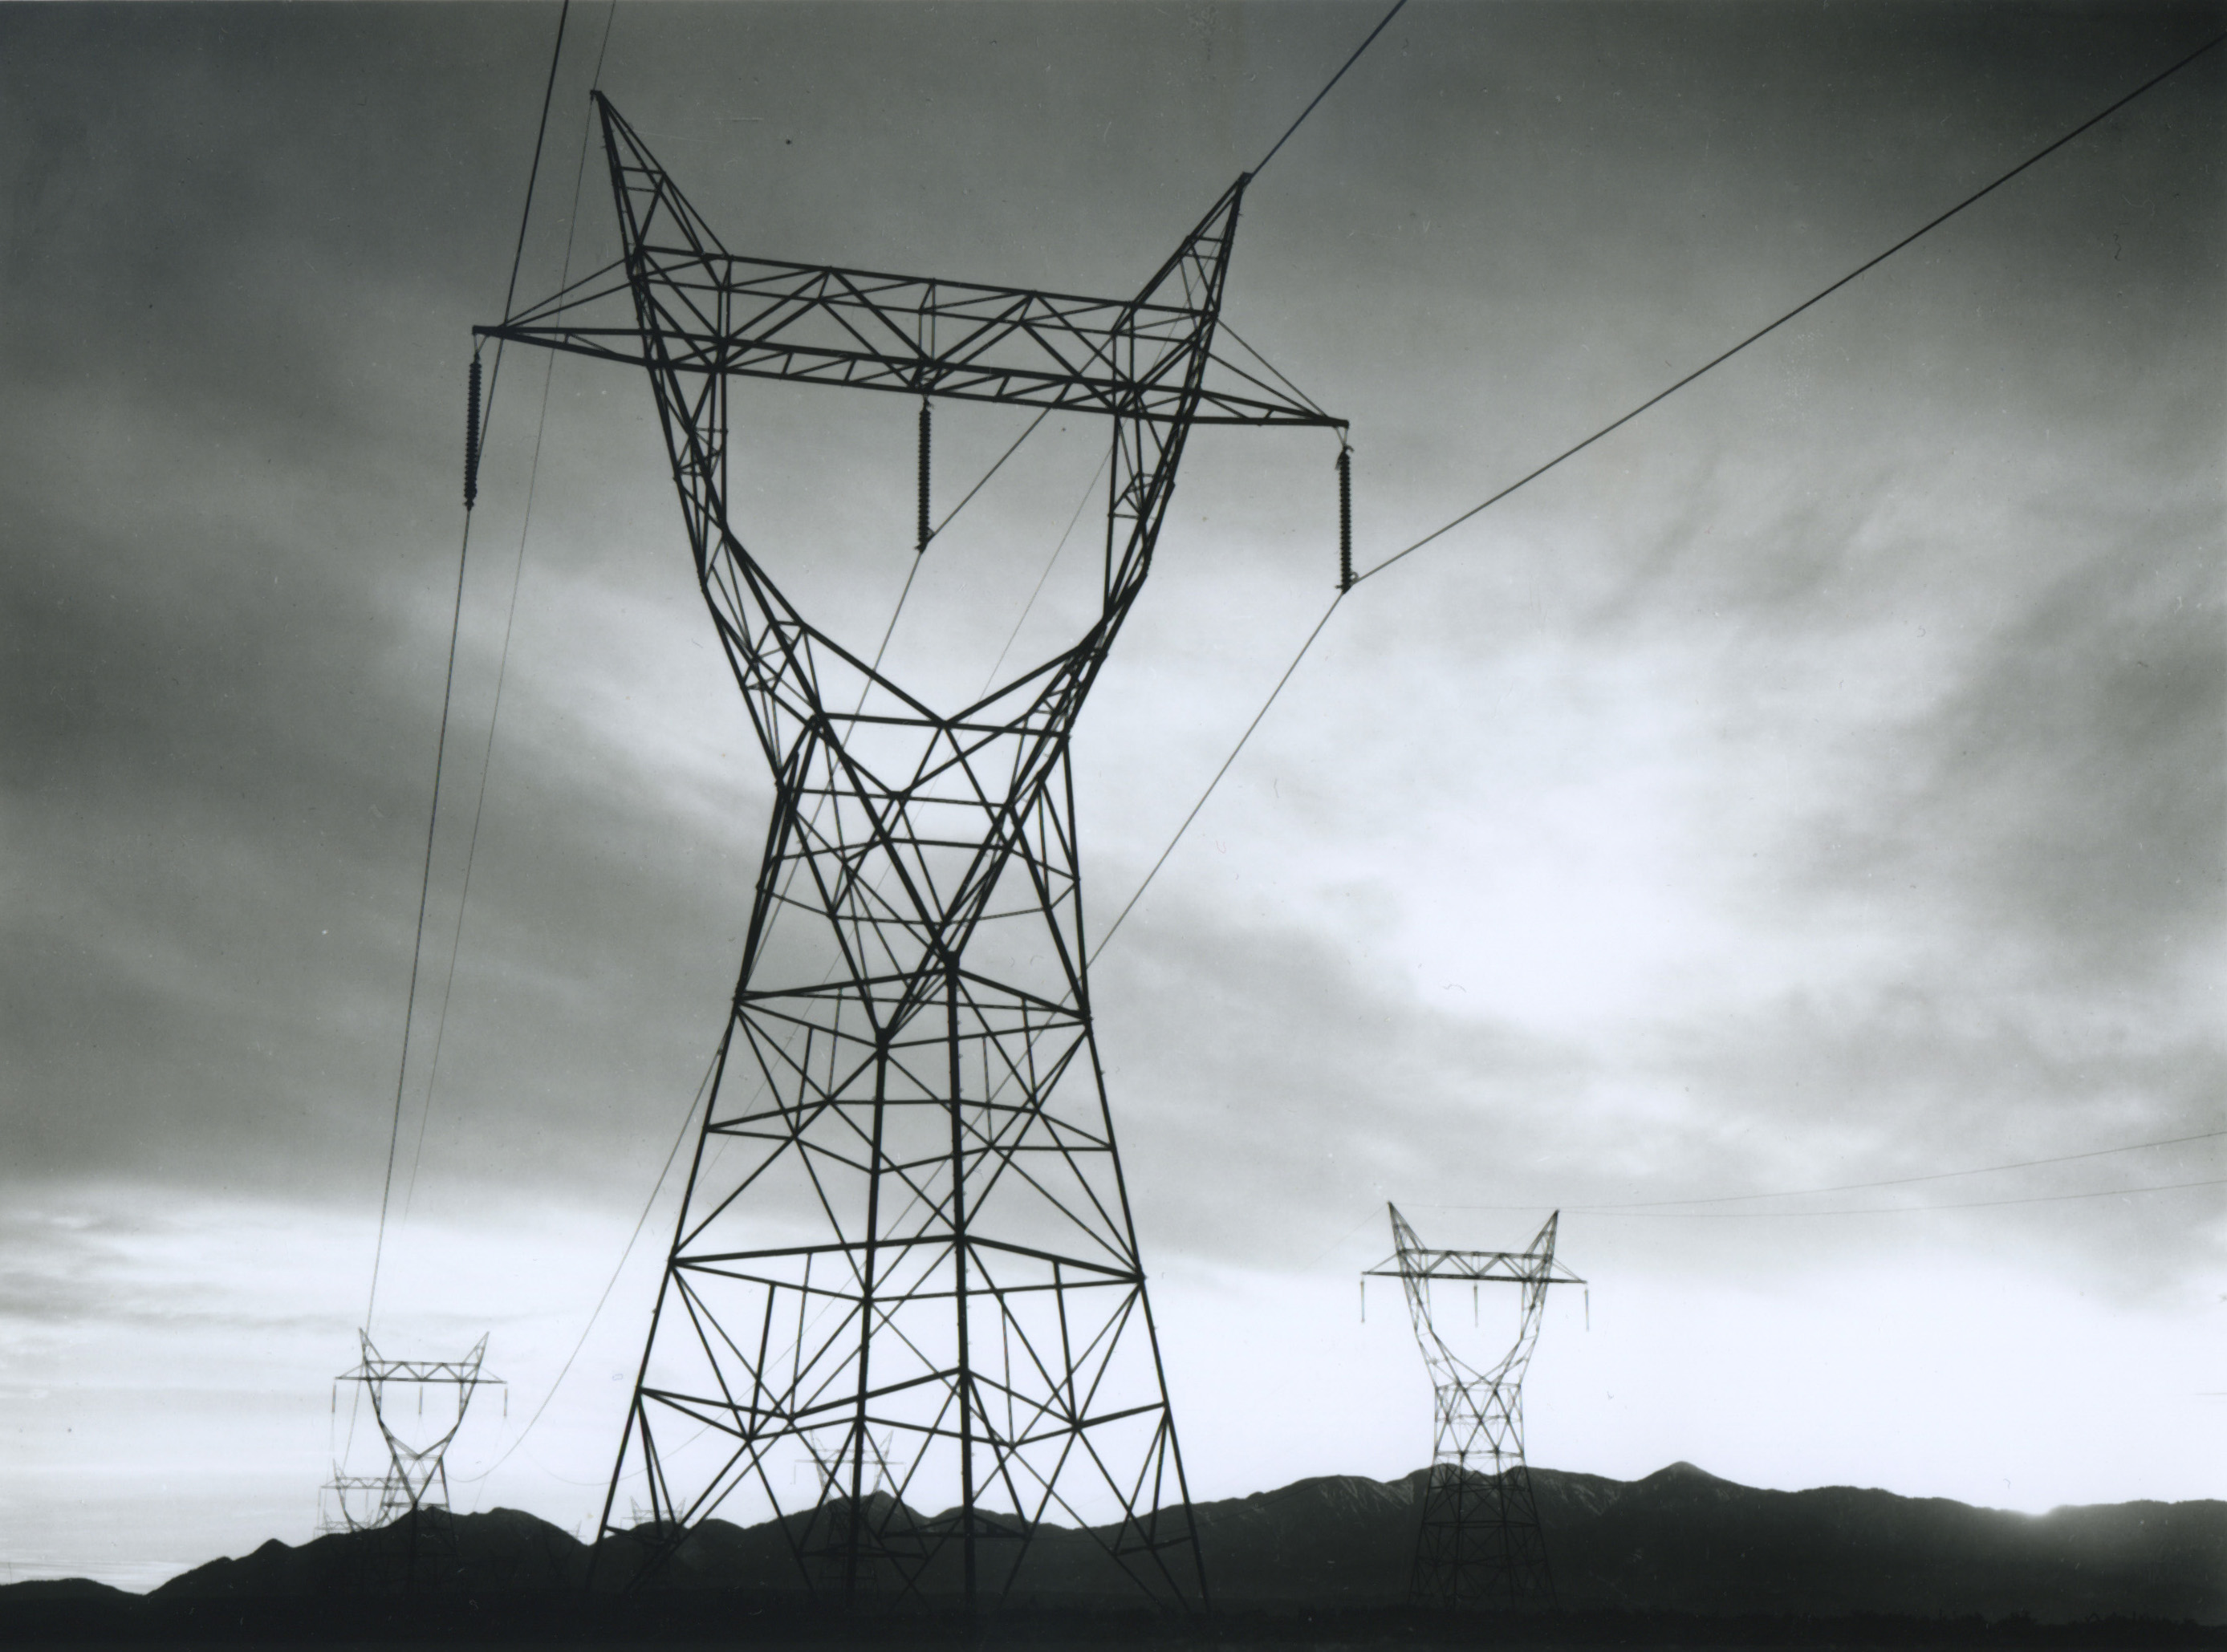 Vintage photo of a transmission line in the Mojave desert from 1941